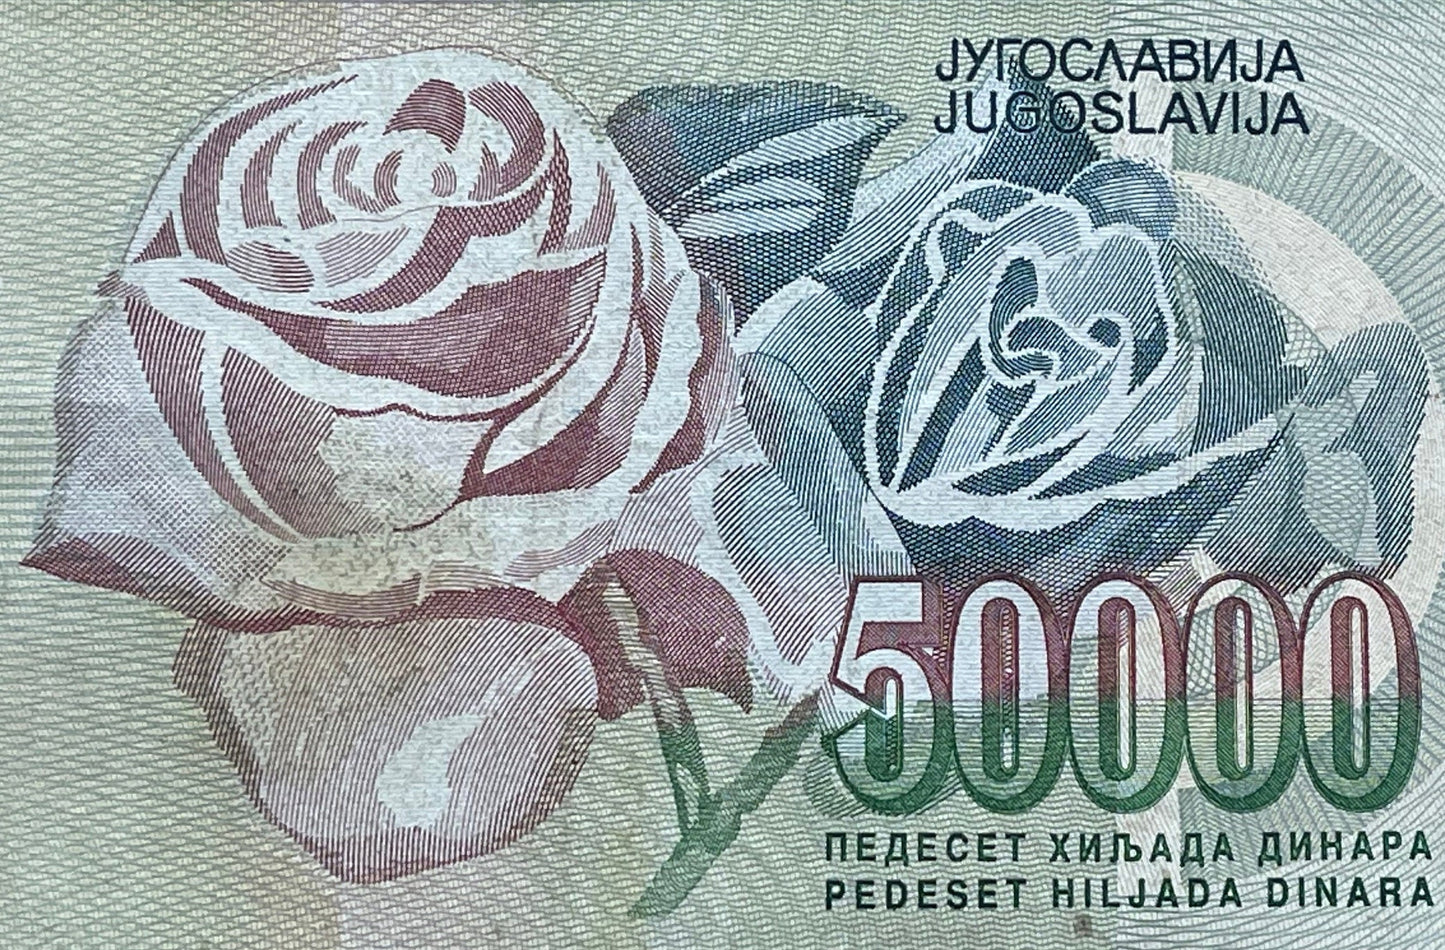 Roses & Boy 50,000 Dinara Yugoslavia Authentic Banknote Money for Jewelry and Craft Making (1992) (CONDITION: VERY FINE)